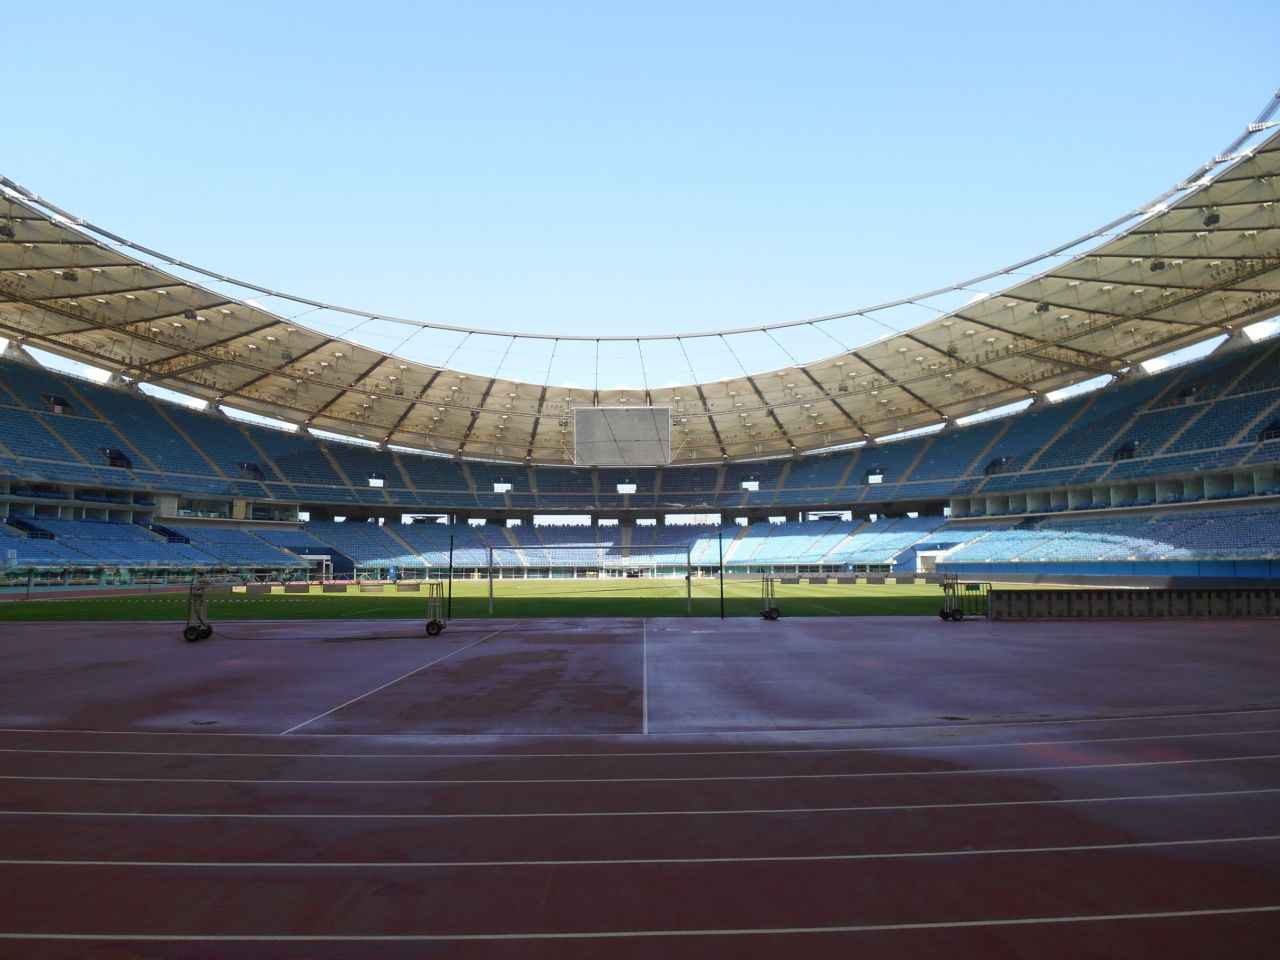 The stadium's doors were only ever opened once more. A free event was held in November 2012 -- for a world record attempt at creating the largest human flag -- yet it was sparsely attended because of public nervousness regarding the reported damage. The public has not been allowed back in since and the stadium remains closed and unused to this day.